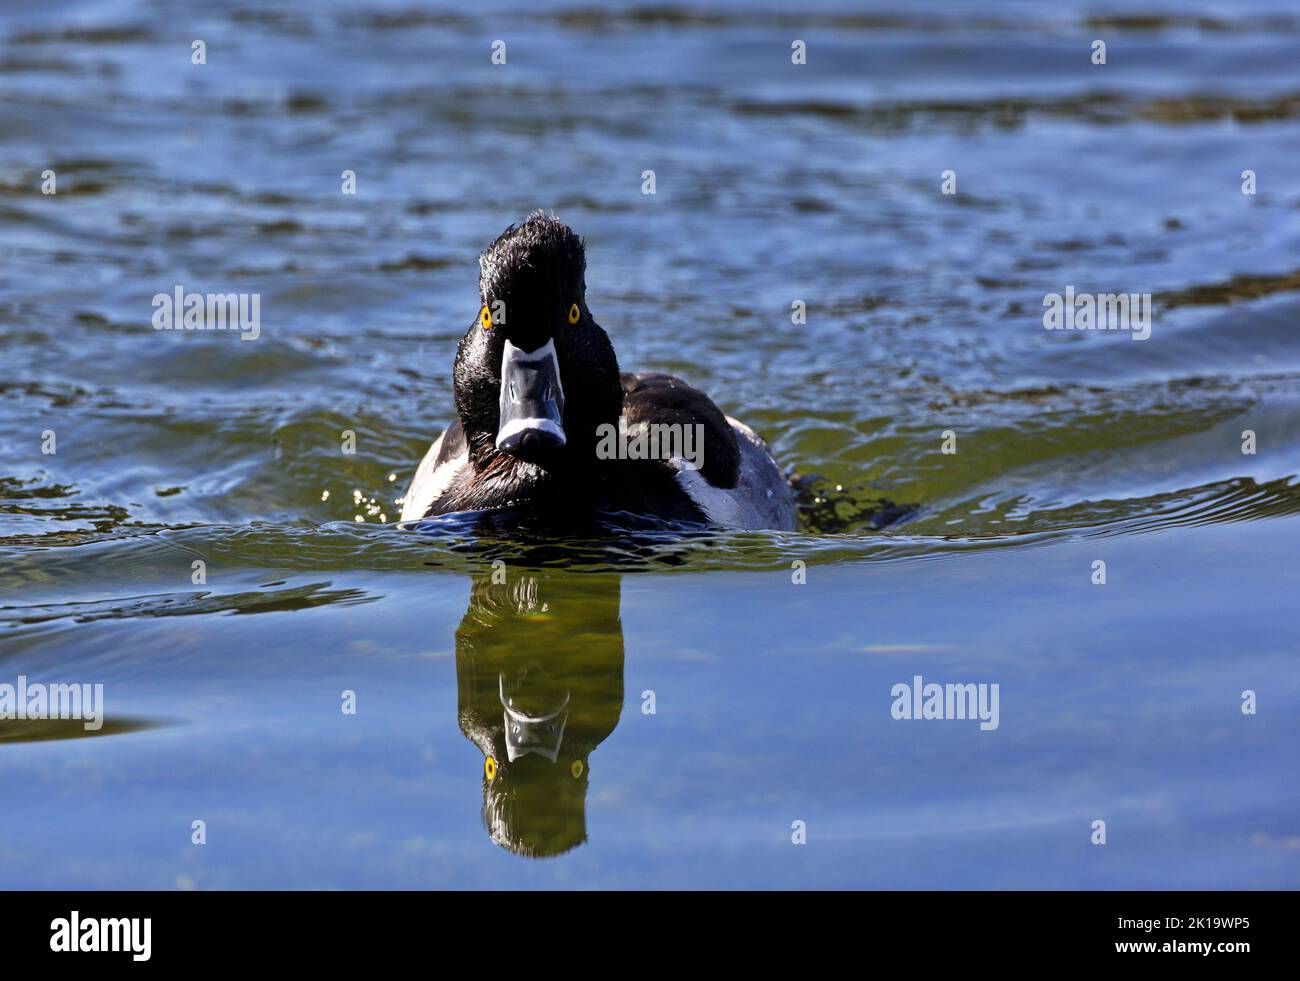 Swimming straight forward, coming at you, confrontational portrait of Ring-necked Duck with reflection in water at Agua Caliente Park in Tucson, Arizo Stock Photo